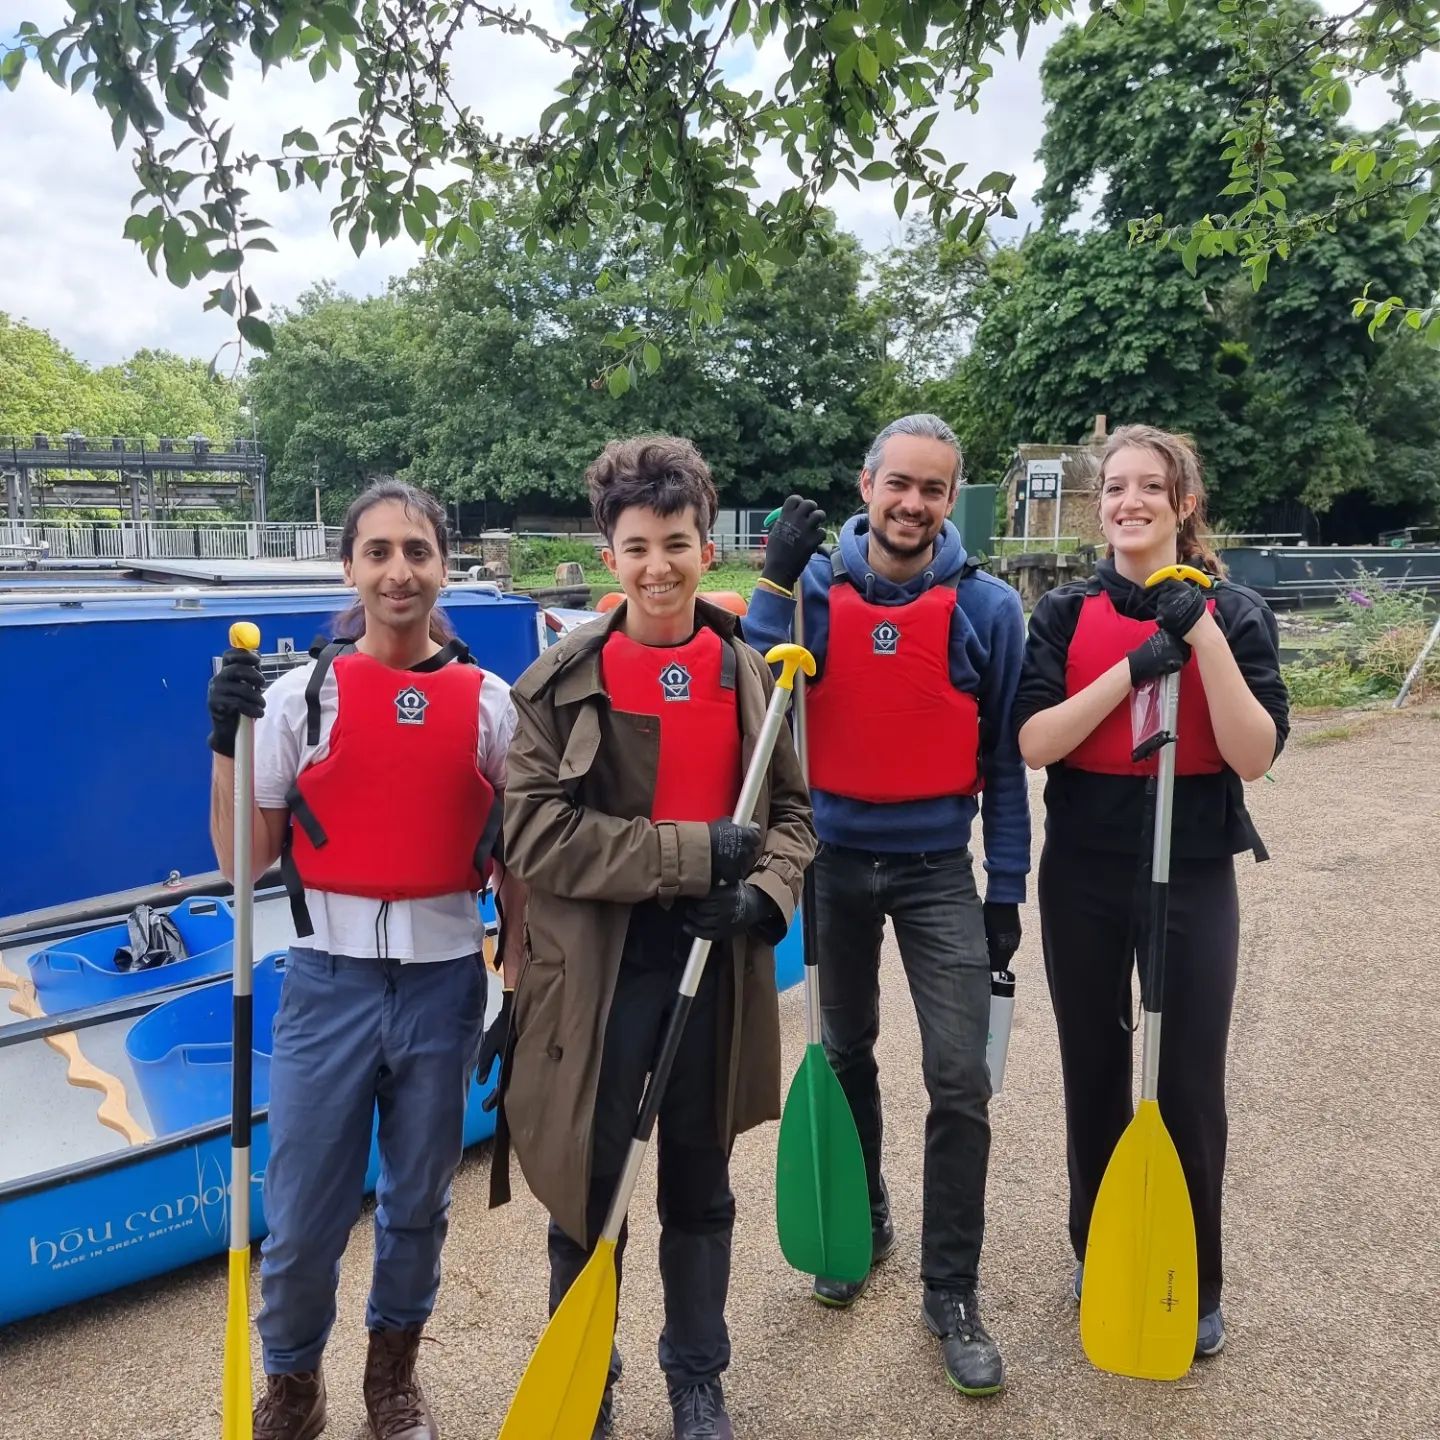 Students and staff next to the canal with buoyancy aids and paddles after litter picking in the River Lea.